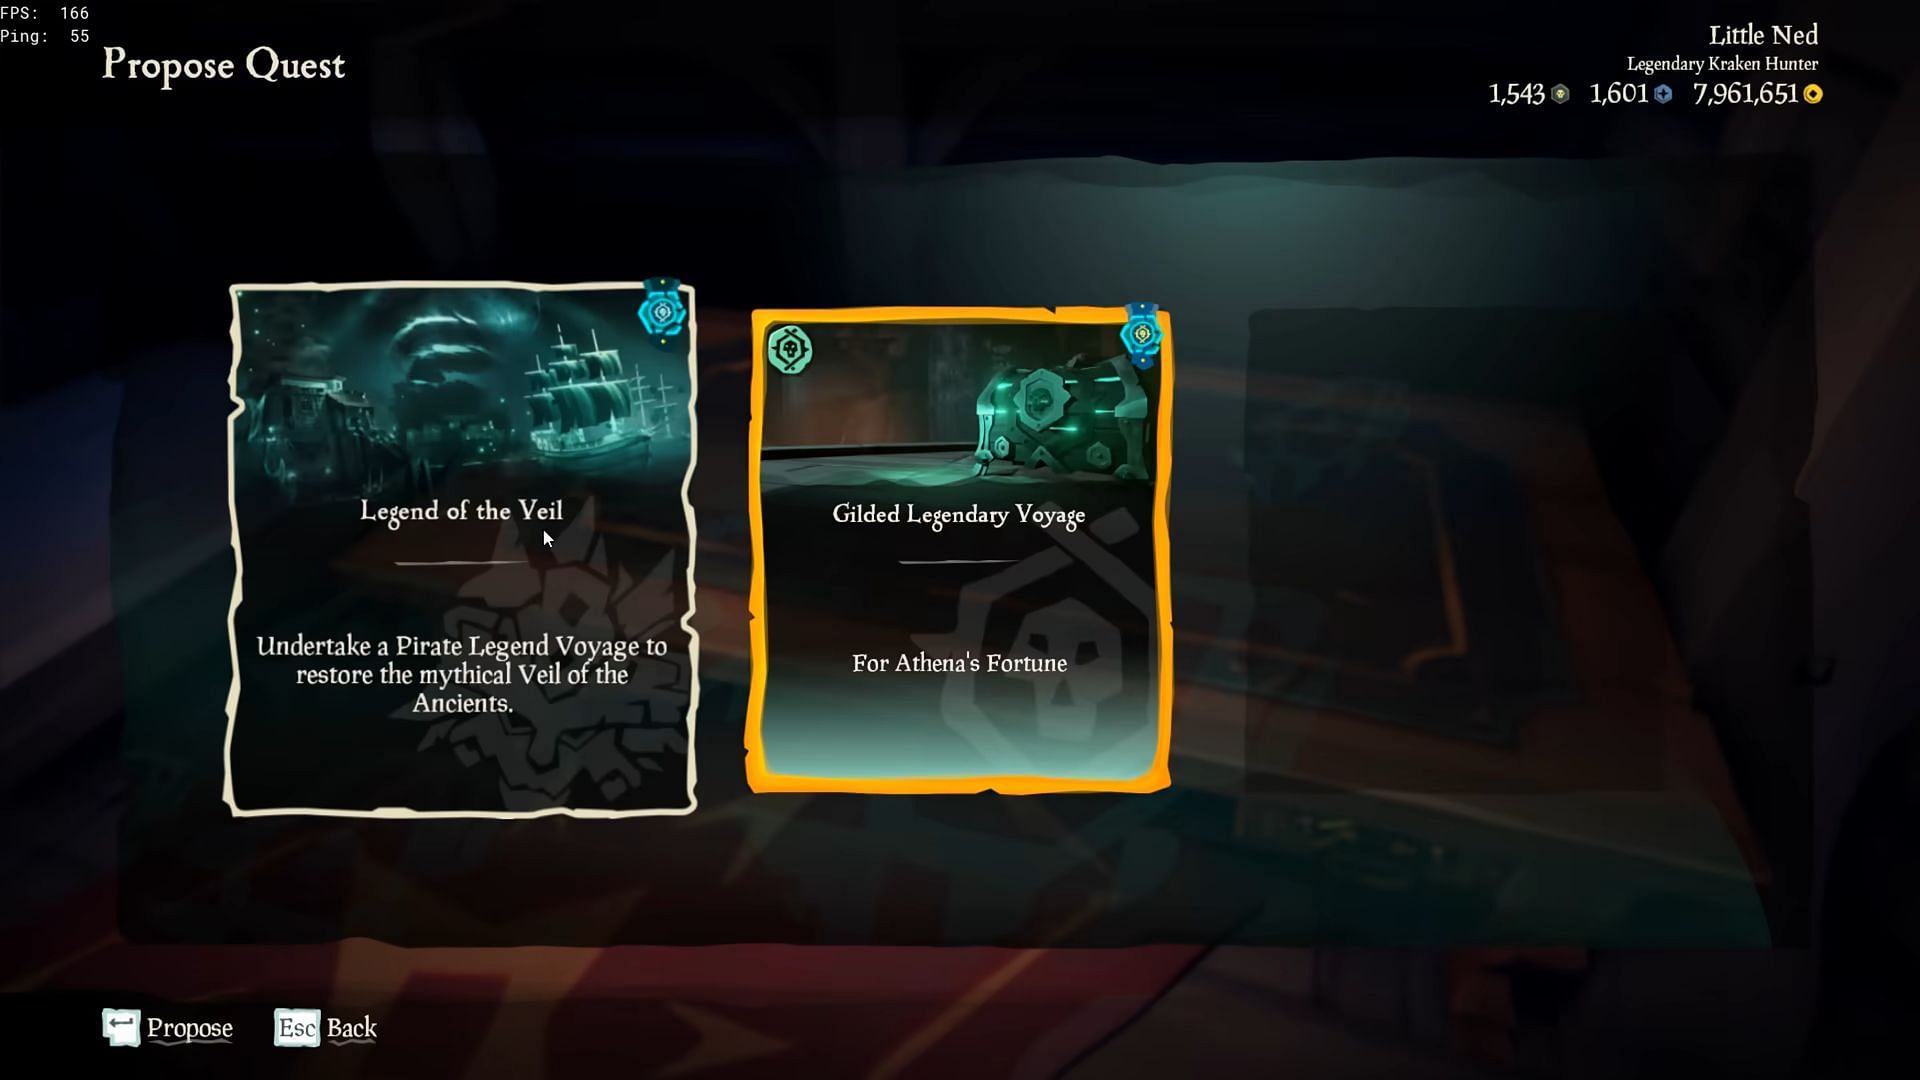 Gilded Legendary Voyage is offered only once a year (Image via Rare/ Cliff The Story Guy on YouTube)